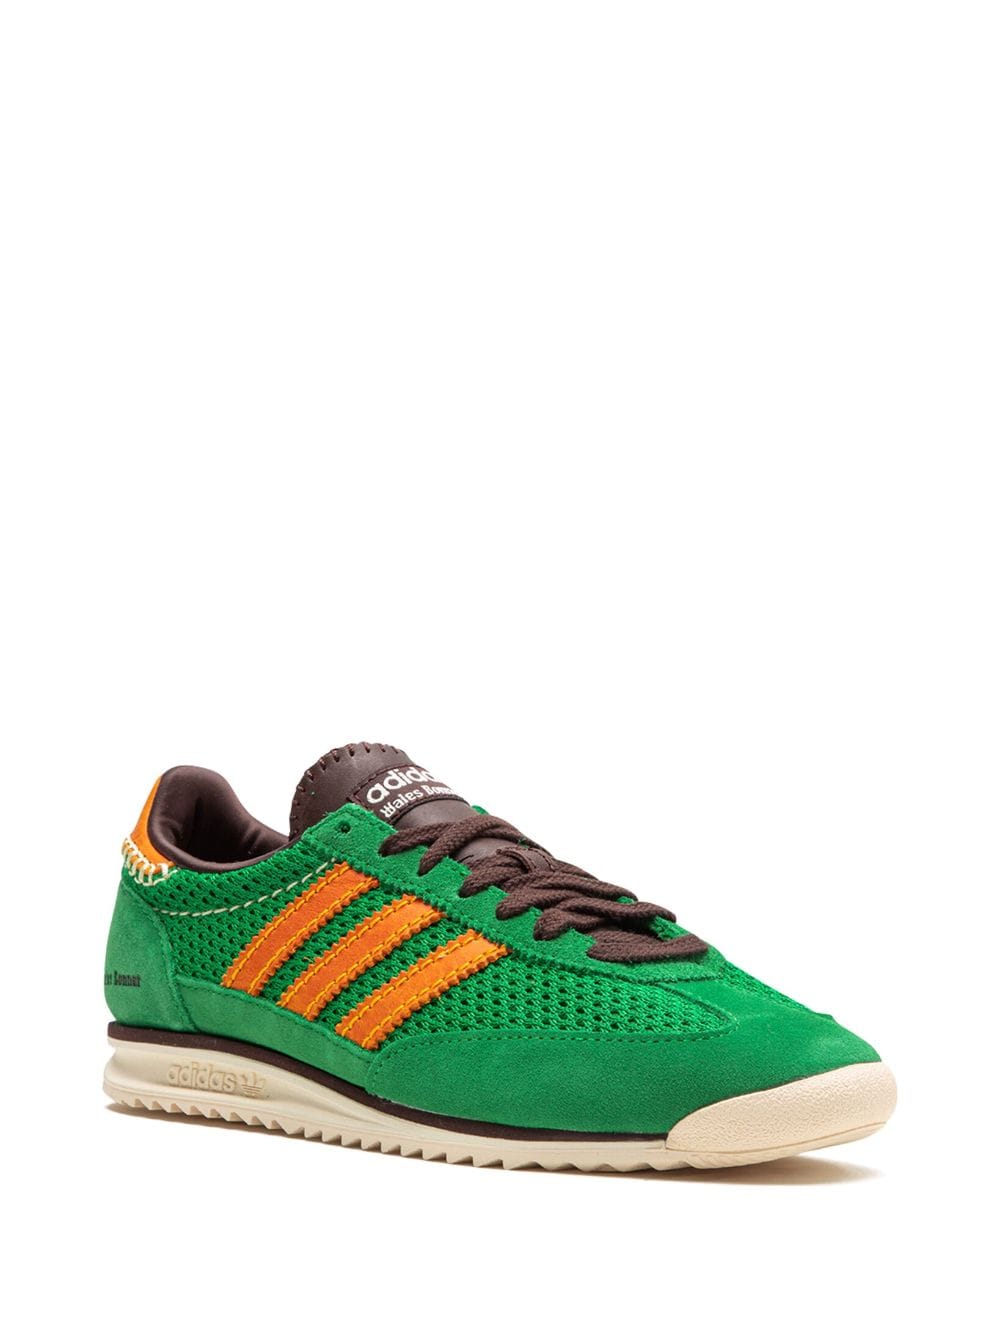 X WALES BONNER SL72 KNITTED SNEAKERS - SHEET-1